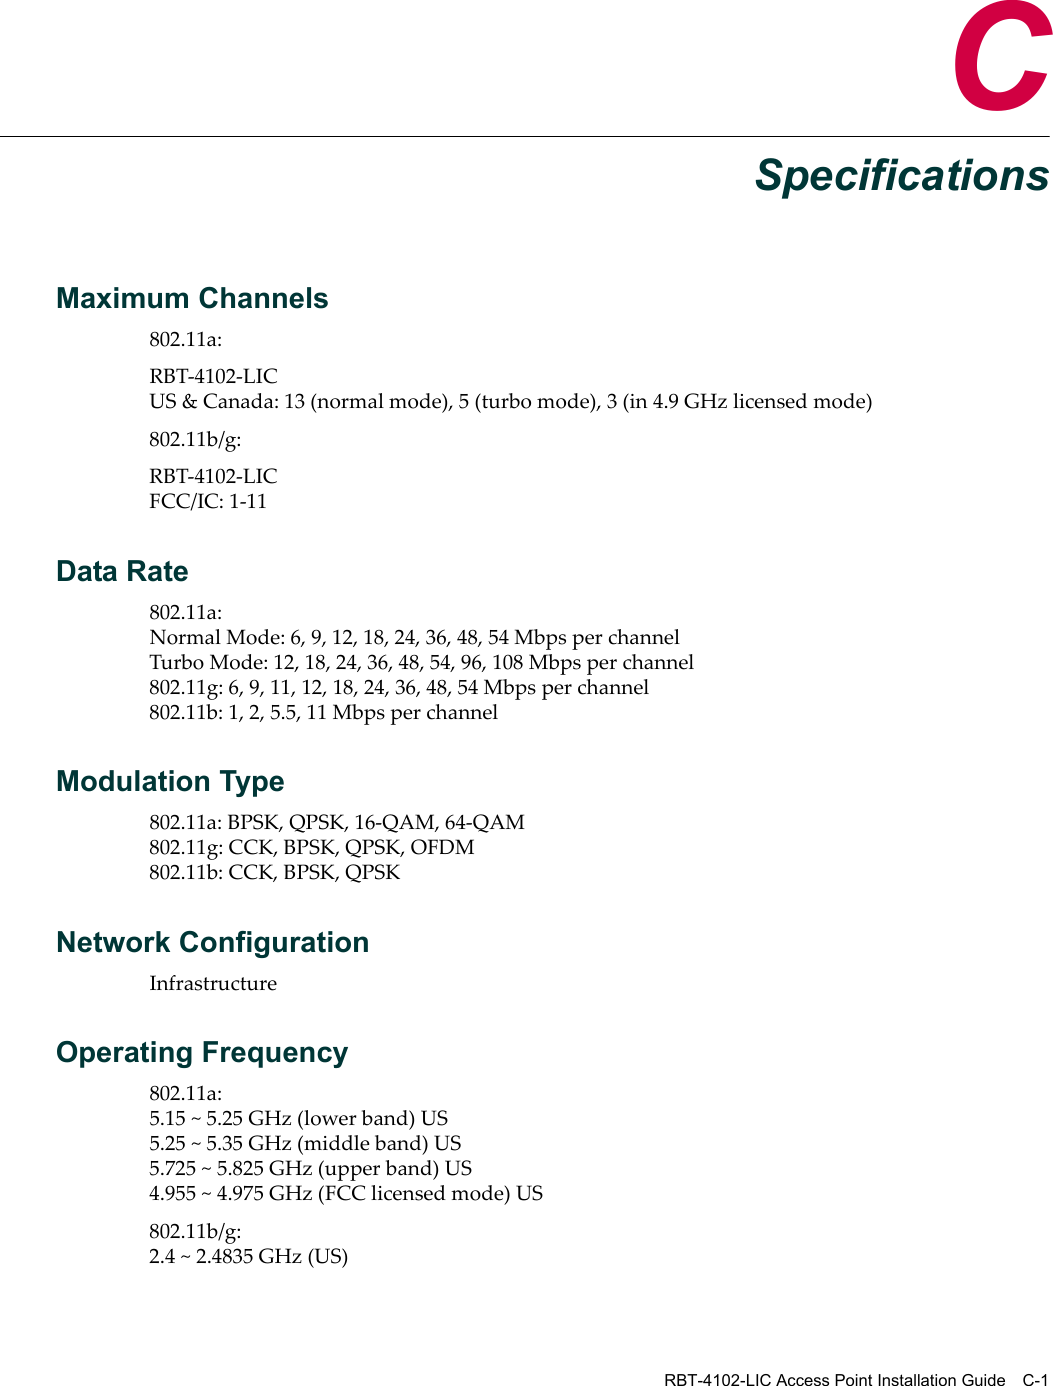 RBT-4102-LIC Access Point Installation Guide C-1CSpecificationsMaximum Channels802.11a:RBT‐4102‐LICUS&amp;Canada:13(normalmode),5(turbomode),3(in4.9GHzlicensedmode)802.11b/g:RBT‐4102‐LICFCC/IC:1‐11Data Rate802.11a:NormalMode:6,9,12,18,24,36,48,54MbpsperchannelTurboMode:12,18,24,36,48,54,96,108Mbpsperchannel802.11g:6,9,11,12,18,24,36,48,54Mbpsperchannel802.11b:1,2,5.5,11MbpsperchannelModulation Type802.11a:BPSK,QPSK,16‐QAM,64‐QAM802.11g:CCK,BPSK,QPSK,OFDM802.11b:CCK,BPSK,QPSKNetwork ConfigurationInfrastructureOperating Frequency802.11a:5.15~5.25GHz(lowerband)US5.25~5.35GHz(middleband)US5.725~5.825GHz(upperband)US4.955~4.975GHz(FCClicensedmode)US802.11b/g:2.4~2.4835GHz(US)